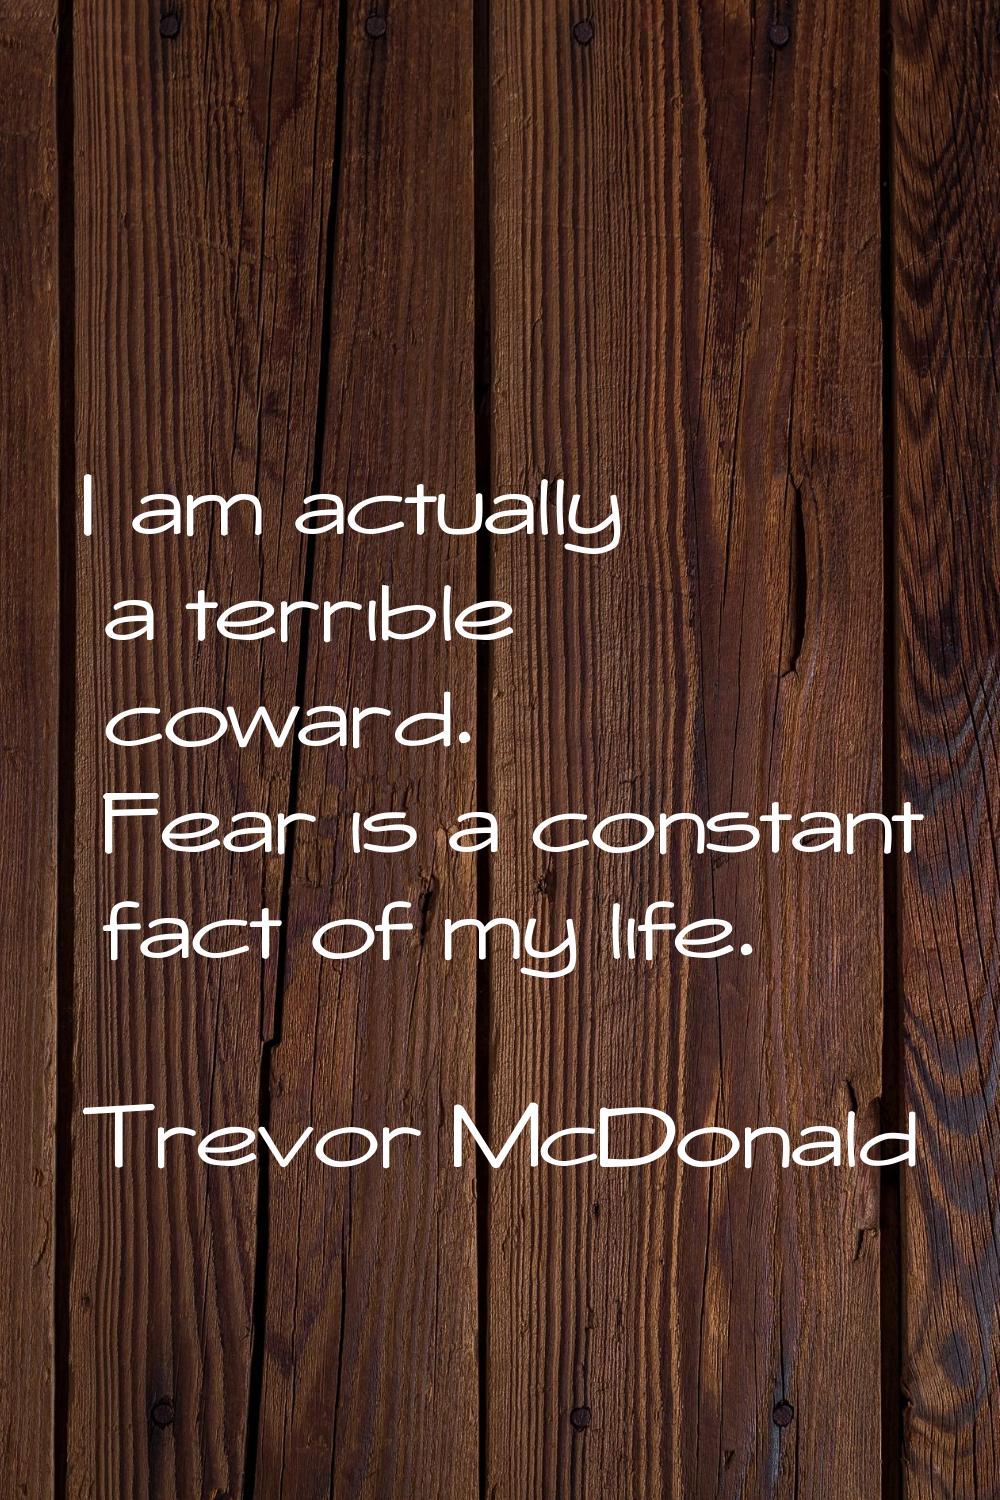 I am actually a terrible coward. Fear is a constant fact of my life.